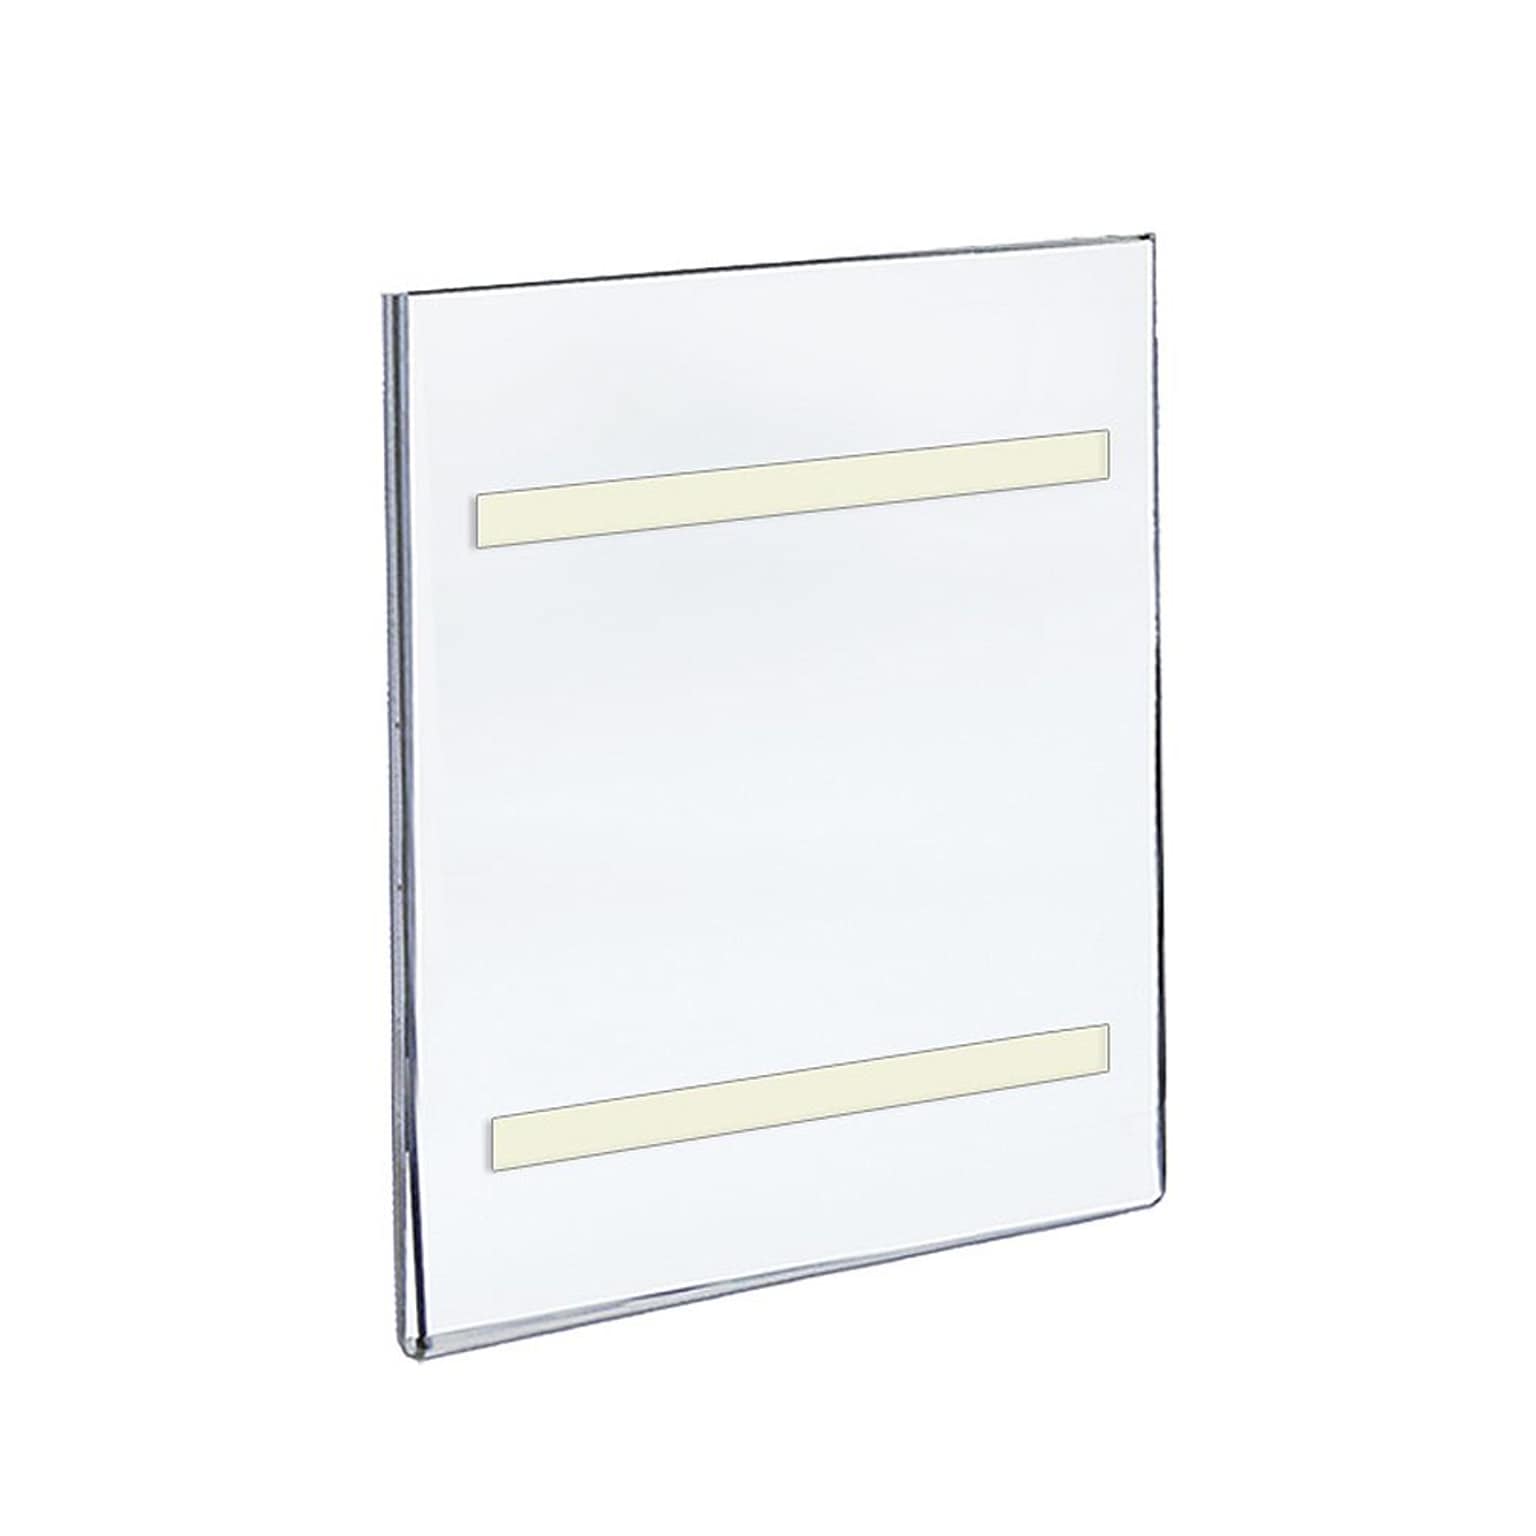 Azar Displays Adhesive Wall Sign Holder, 8W x 10H, Clear, 10/Pack (122025)